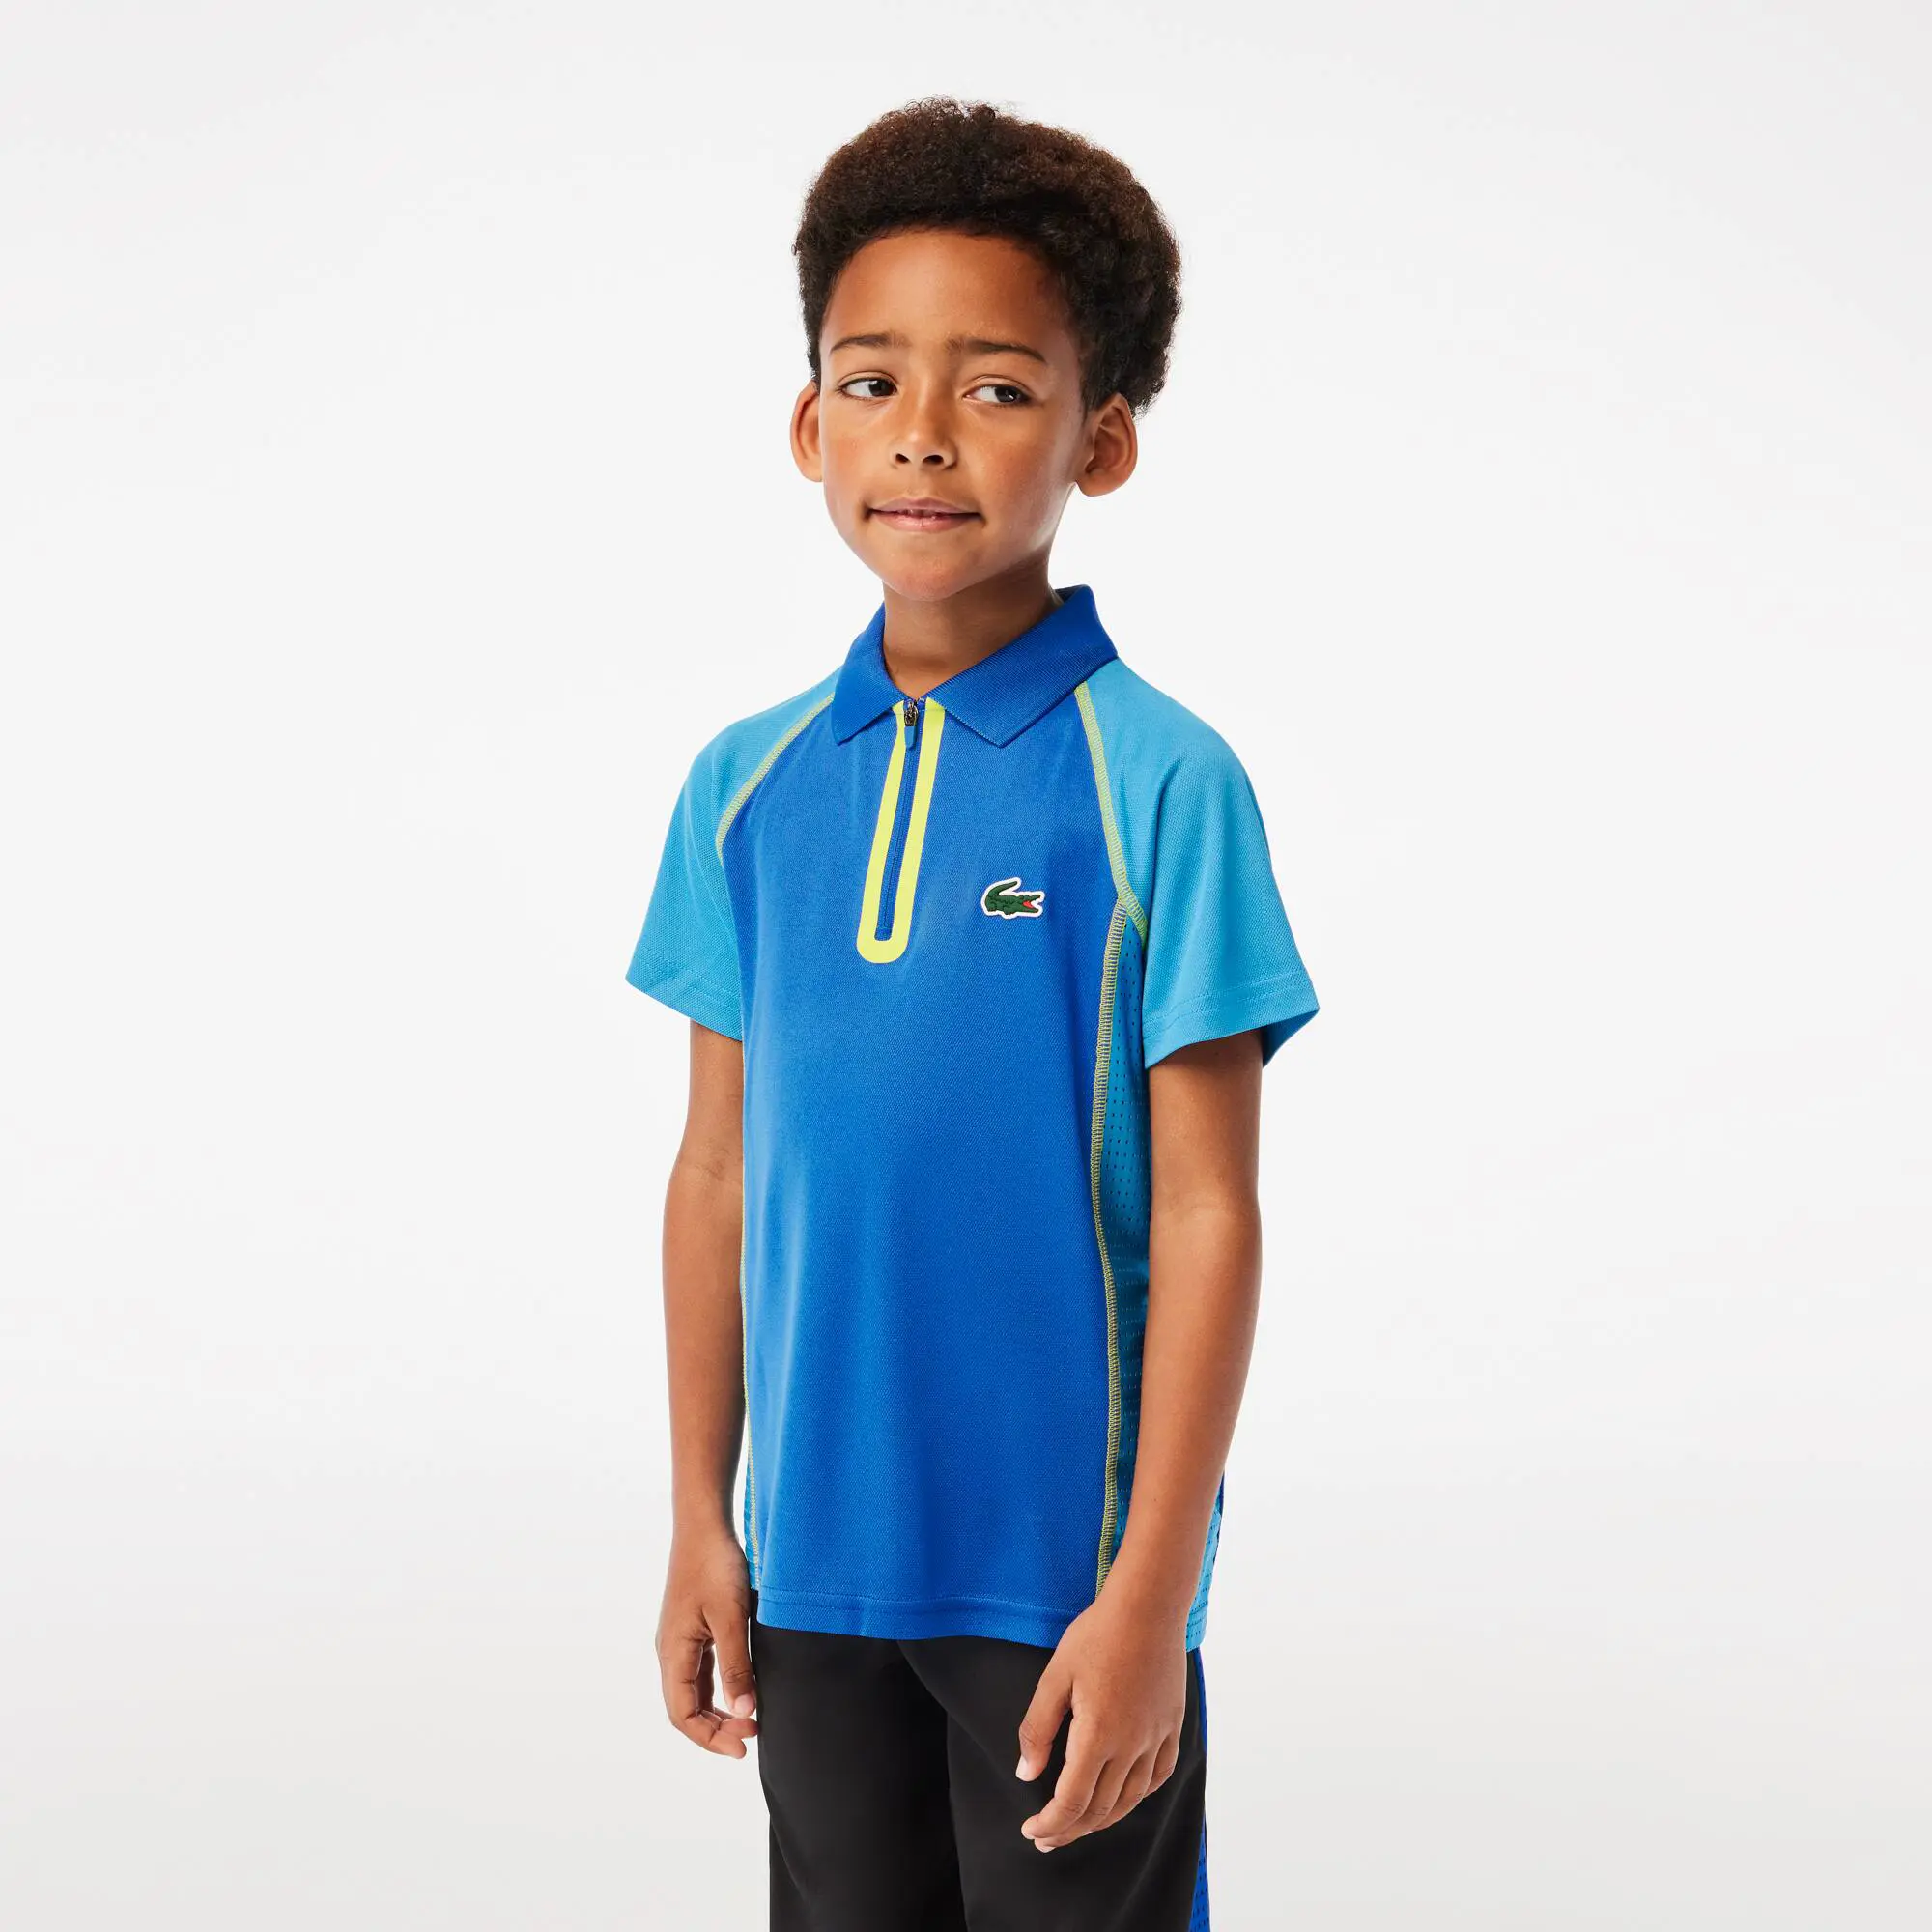 Lacoste Boys’ Lacoste Tennis Polo Shirt in Ultra-Dry Recycled Polyester. 1